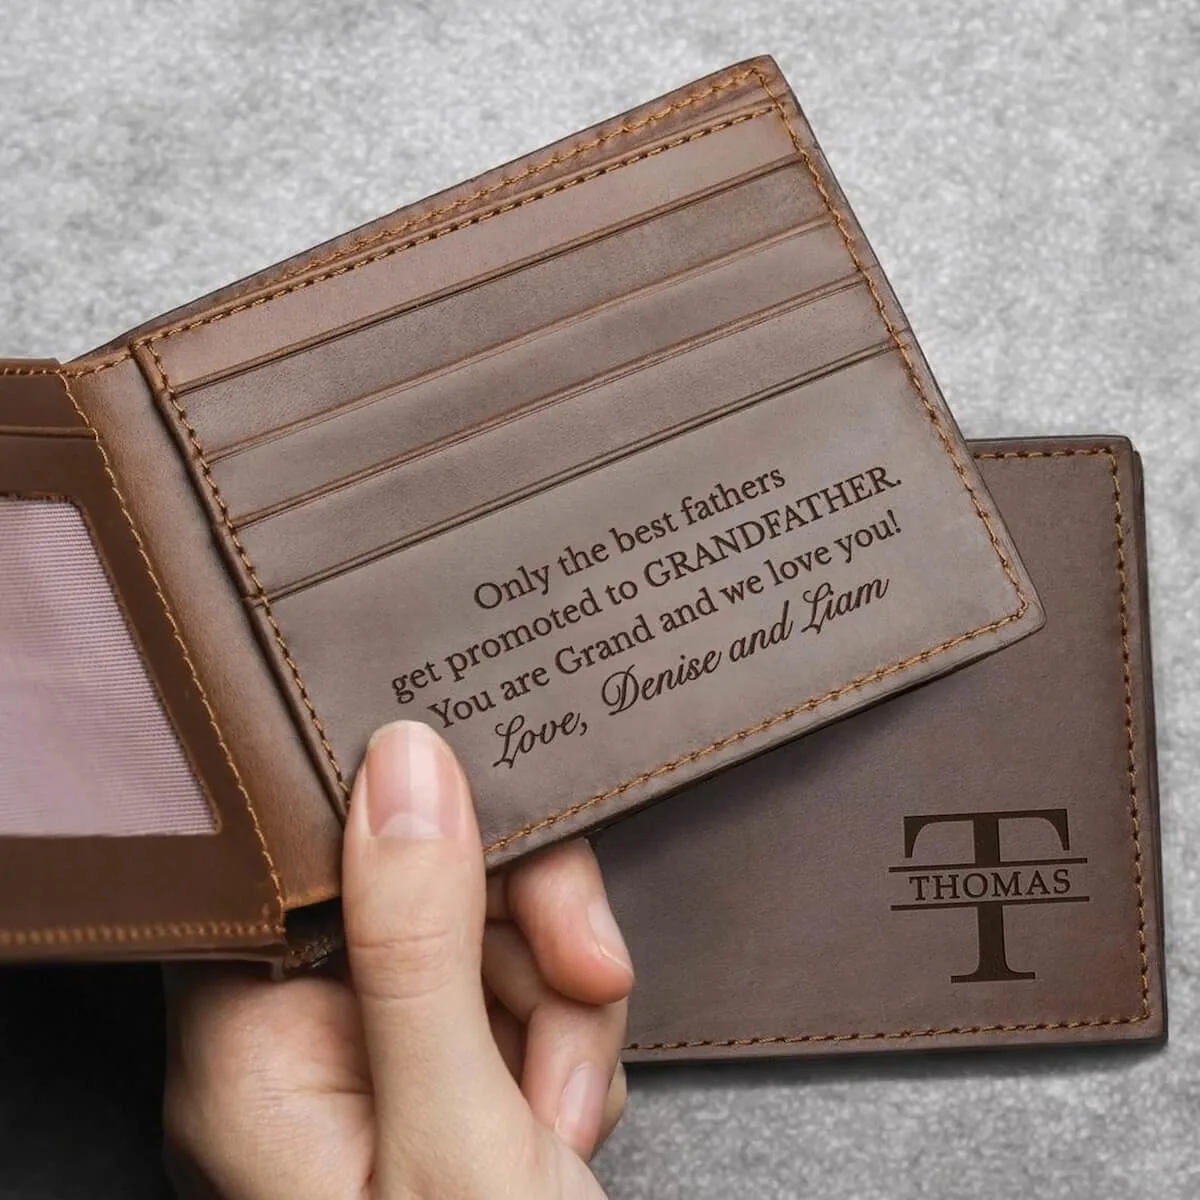 Personalised leather wallet with message for grandfather